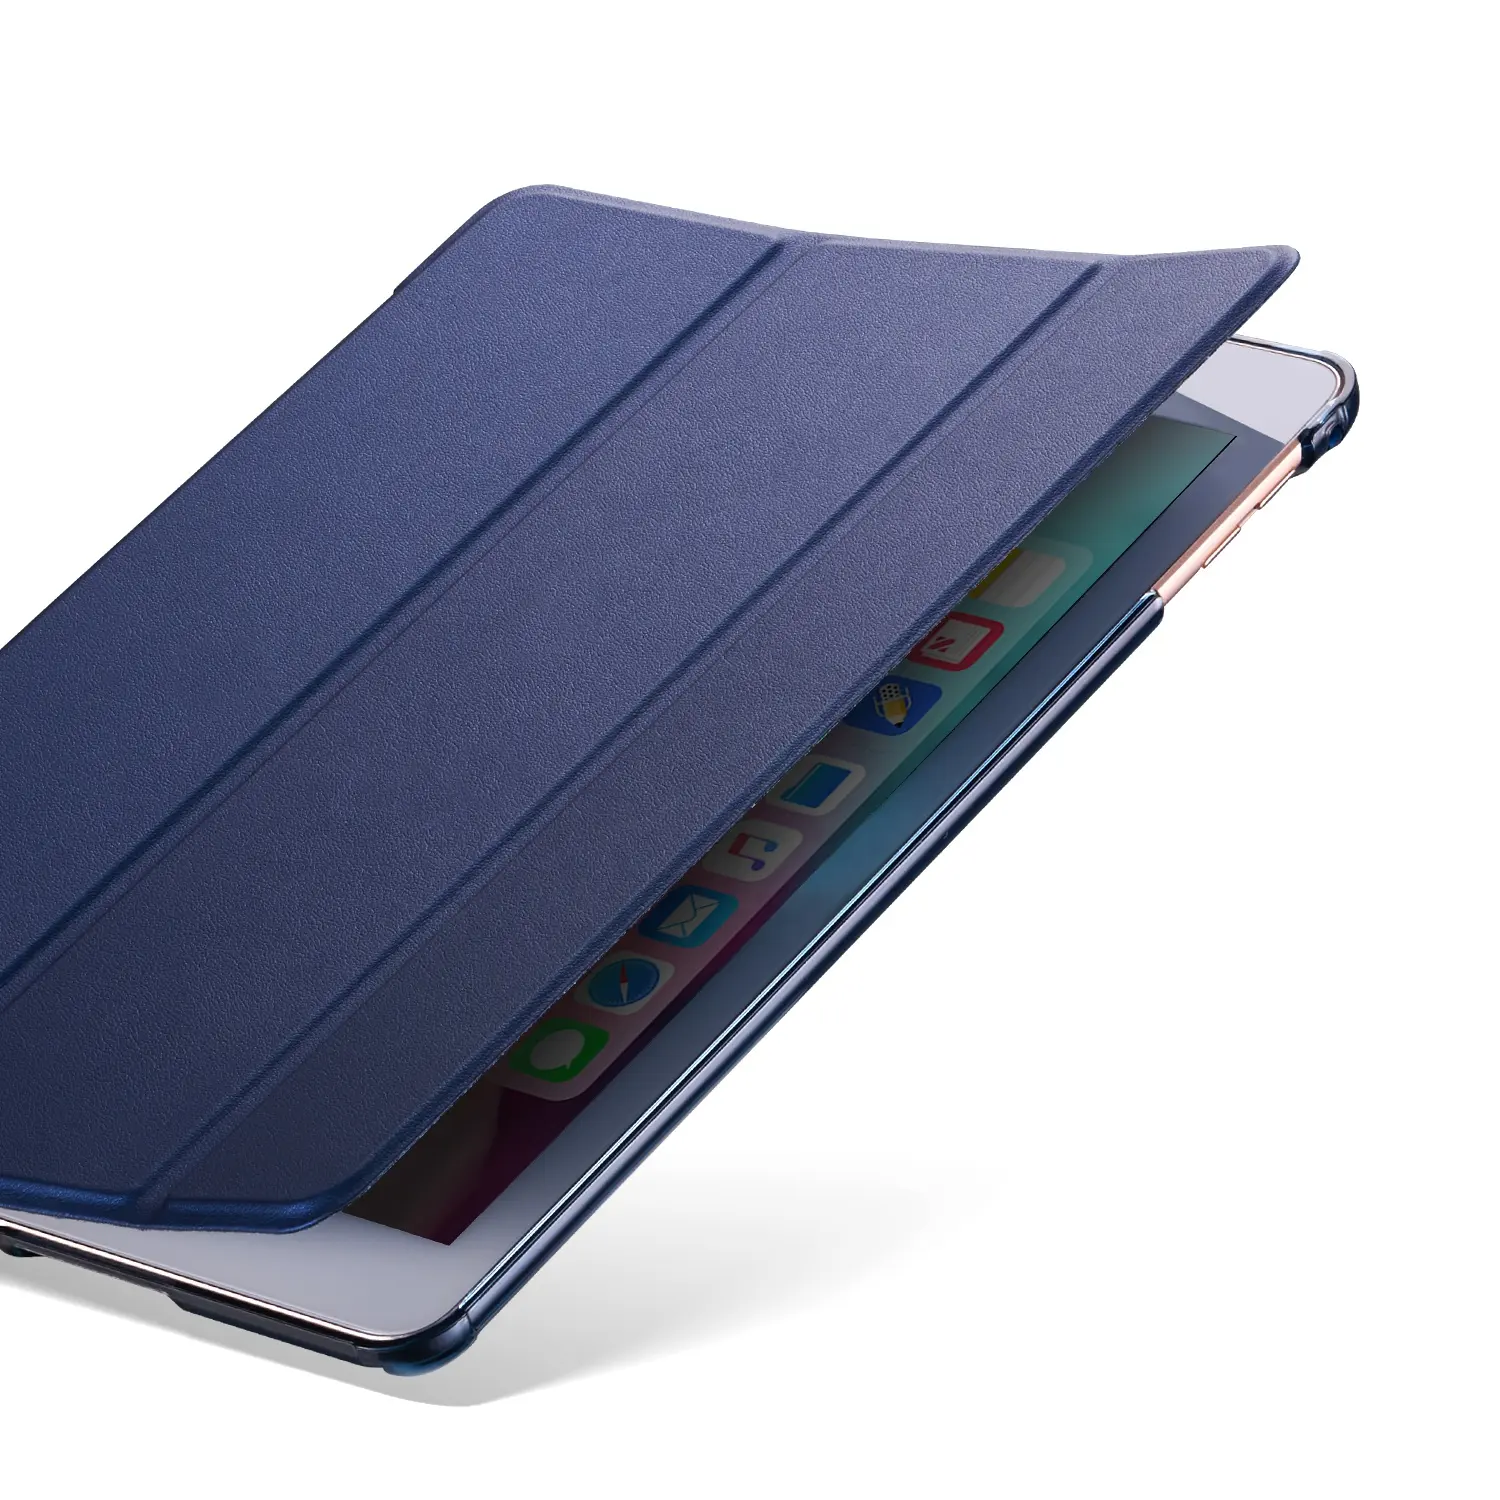 Universele Opvouwbare Smart Case Cover Voor Ipad 5/6/7/8/Air 2 Cover Tablet Case